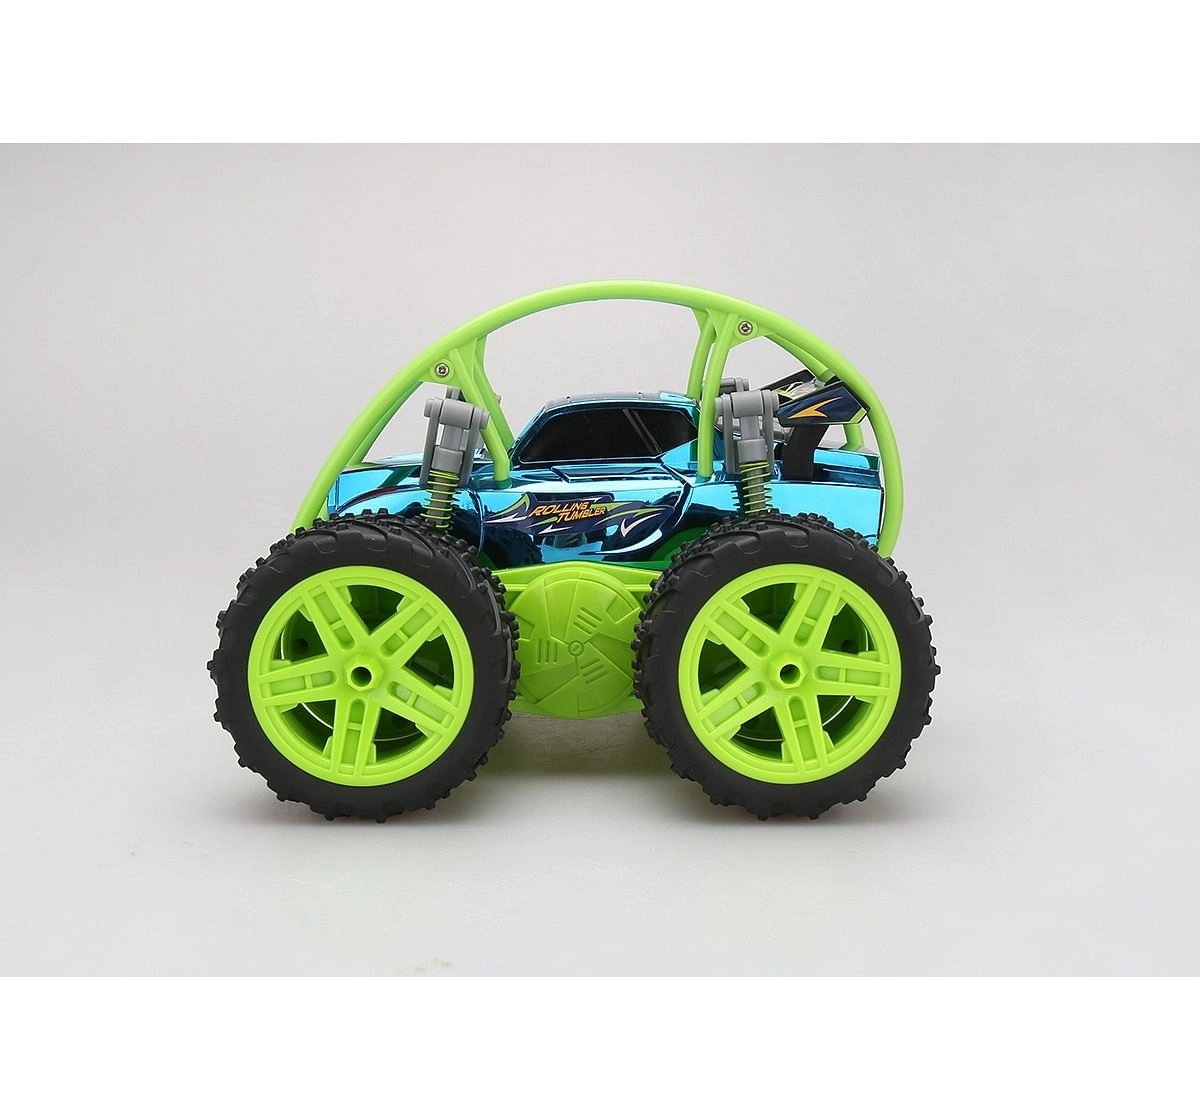 Dihua 2.4G 4 Channel 360 Spinning R/C Stunt Car for Kids age 6Y+ 